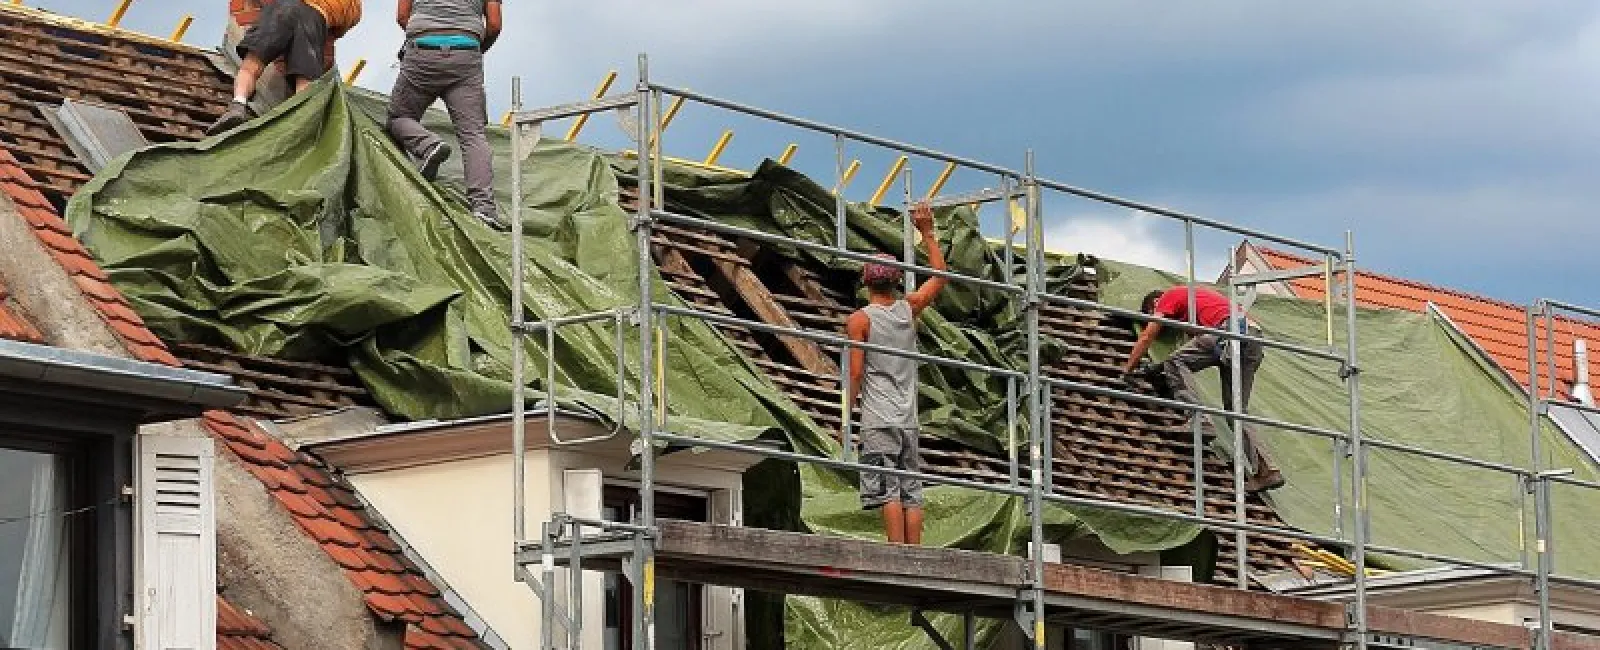 Know the Advantages of a Full Roof Replacement